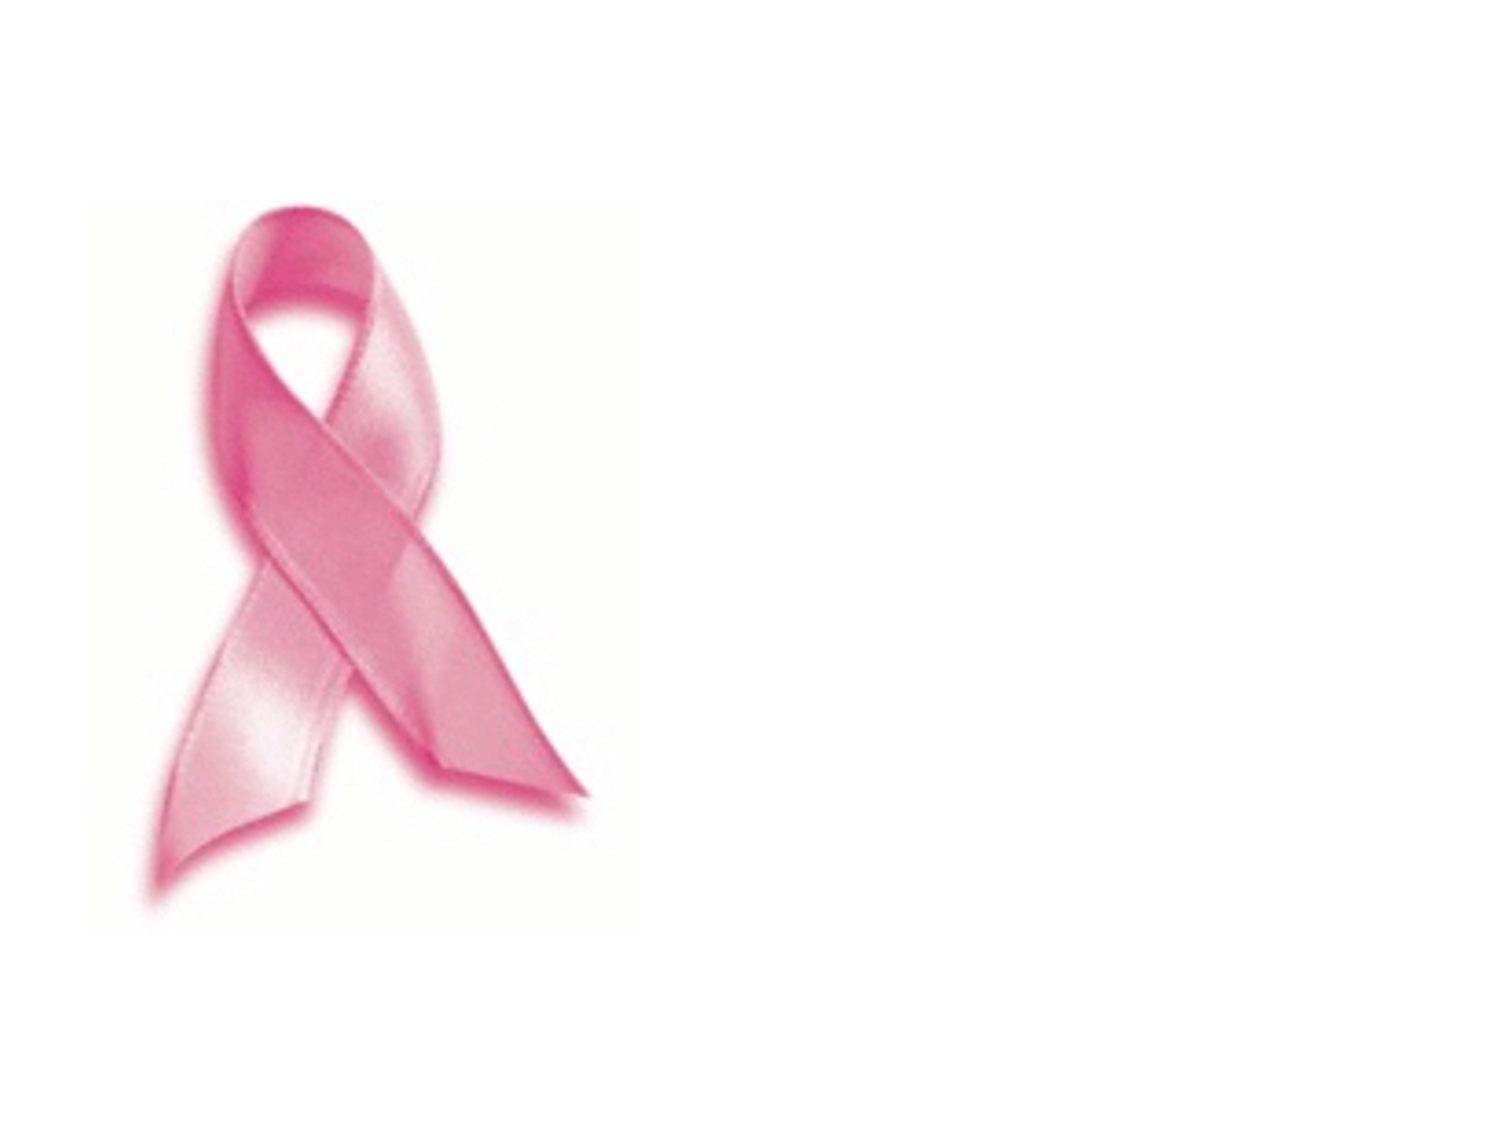 Breast Cancer Awareness Ribbon Free Template  ClipArt Best   Design PPT Backgrounds